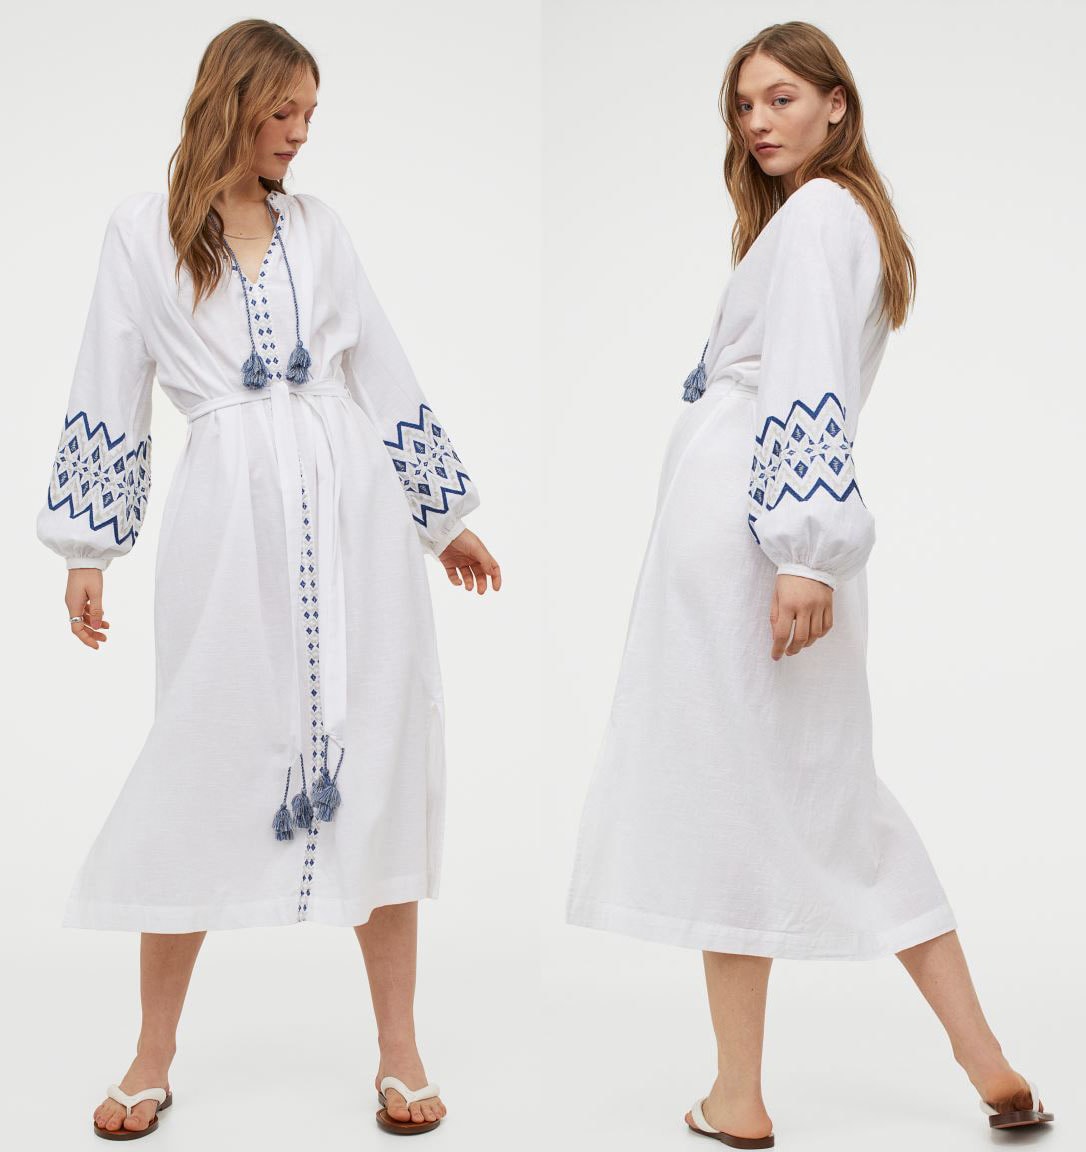 A lightweight kaftan dress made from woven cotton fabric with embroideries, tassels, and raglan balloon sleeves